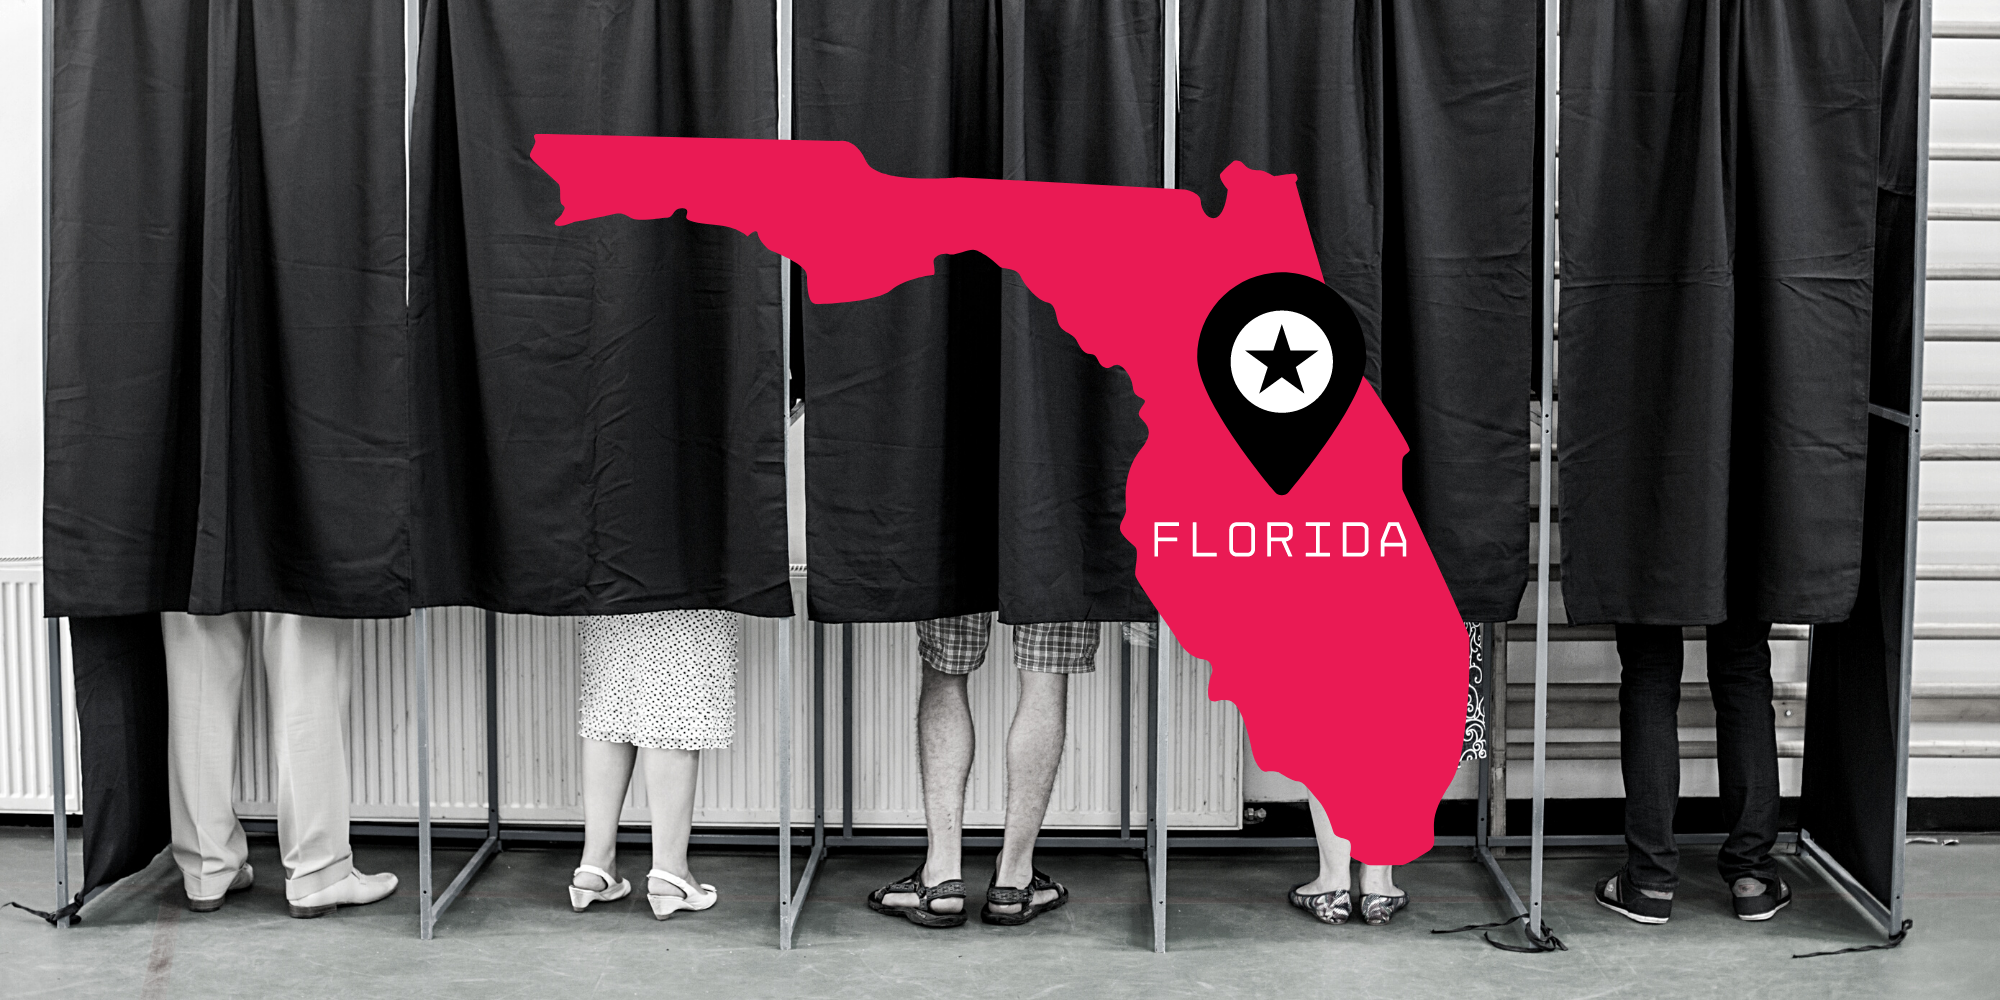 Why is it so hard to vote in Florida?